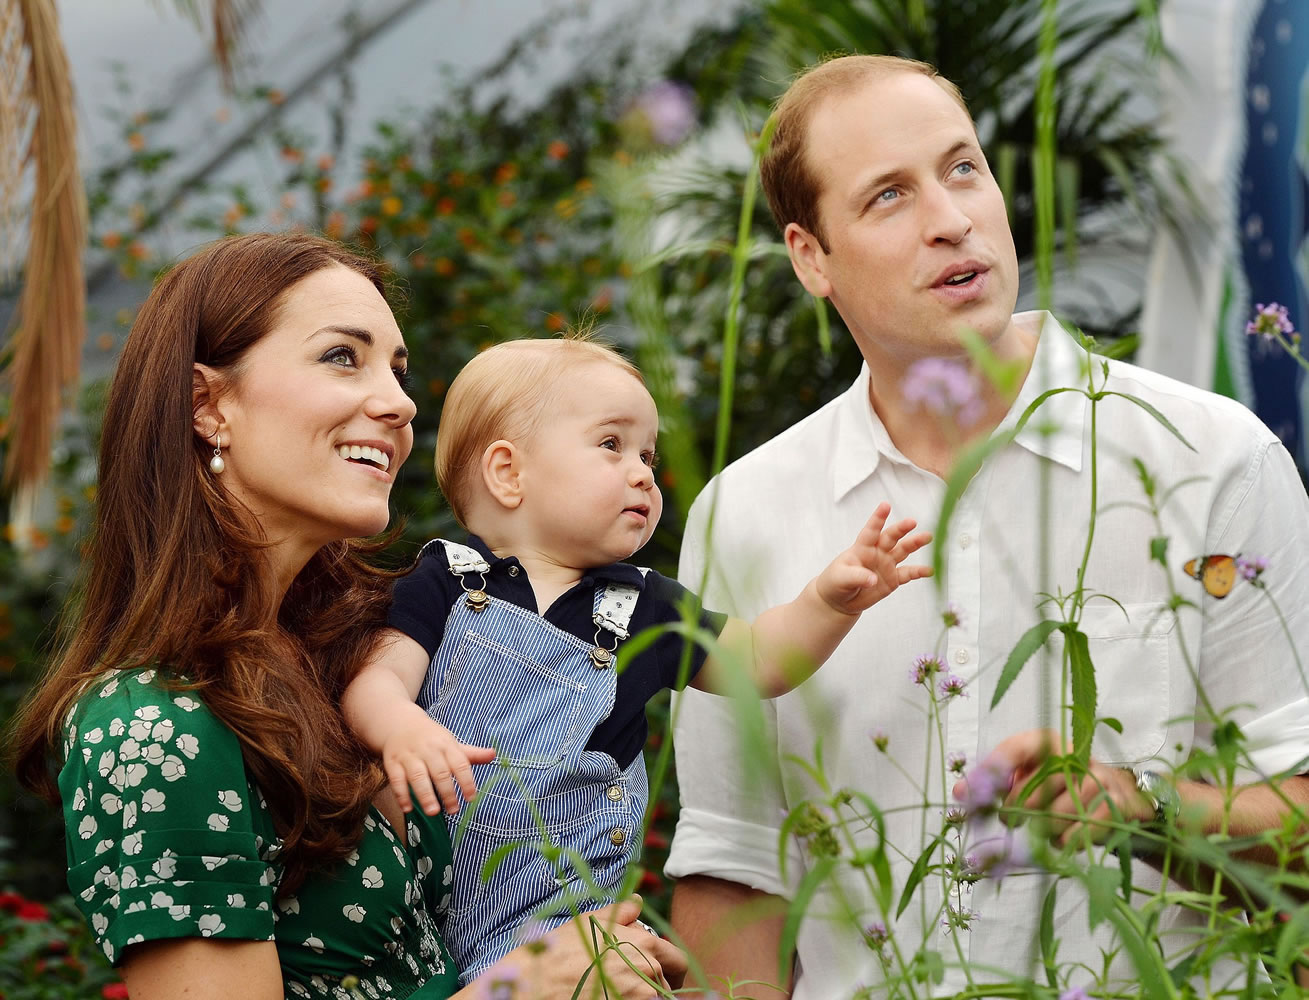 Britain's Prince William and Kate Duchess of Cambridge and Prince George visit the Sensational Butterflies exhibition July 2 at the Natural History Museum in London.